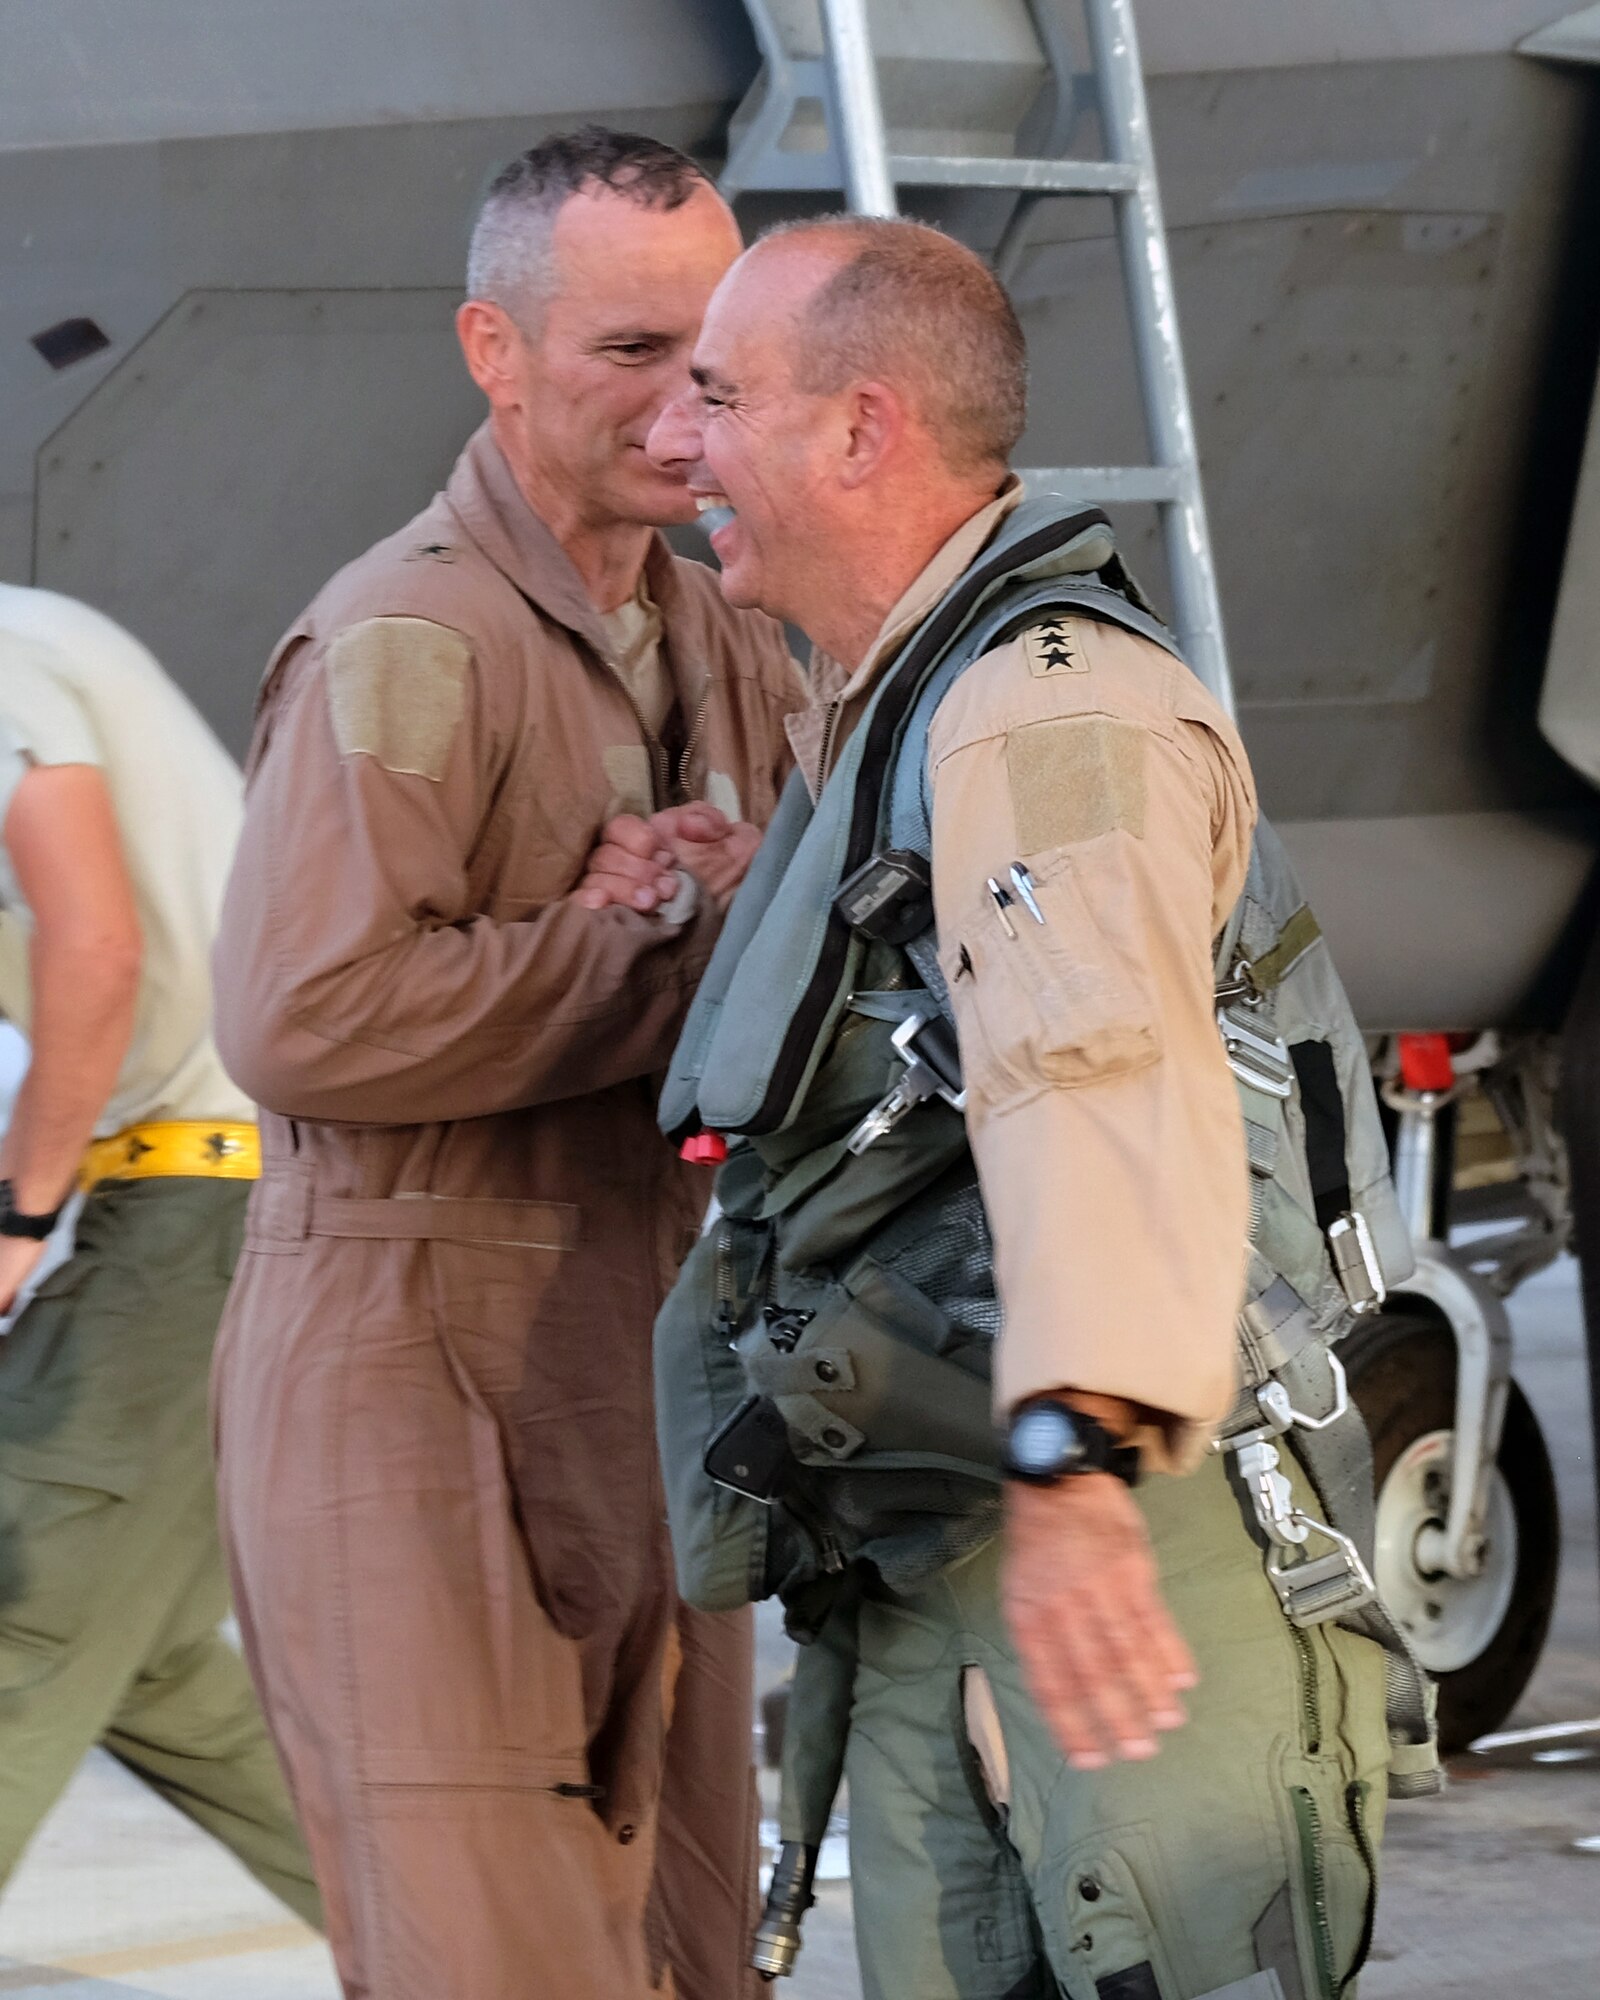 Brig. Gen. Charles S. Corcoran, left, 380th Air Expeditionary Wing commander, shares a word with Lt. Gen. Jeffrey L. Harrigian, U.S. Air Forces Central Command commander, at his fini-flight June 30, 2017, at an undisclosed location in southwest Asia. Harrigian, a captain at the time, previously served as an instructor to then 2nd Lt. Charles Corcoran. (U.S. Air Force photo by Senior Airman Preston Webb)